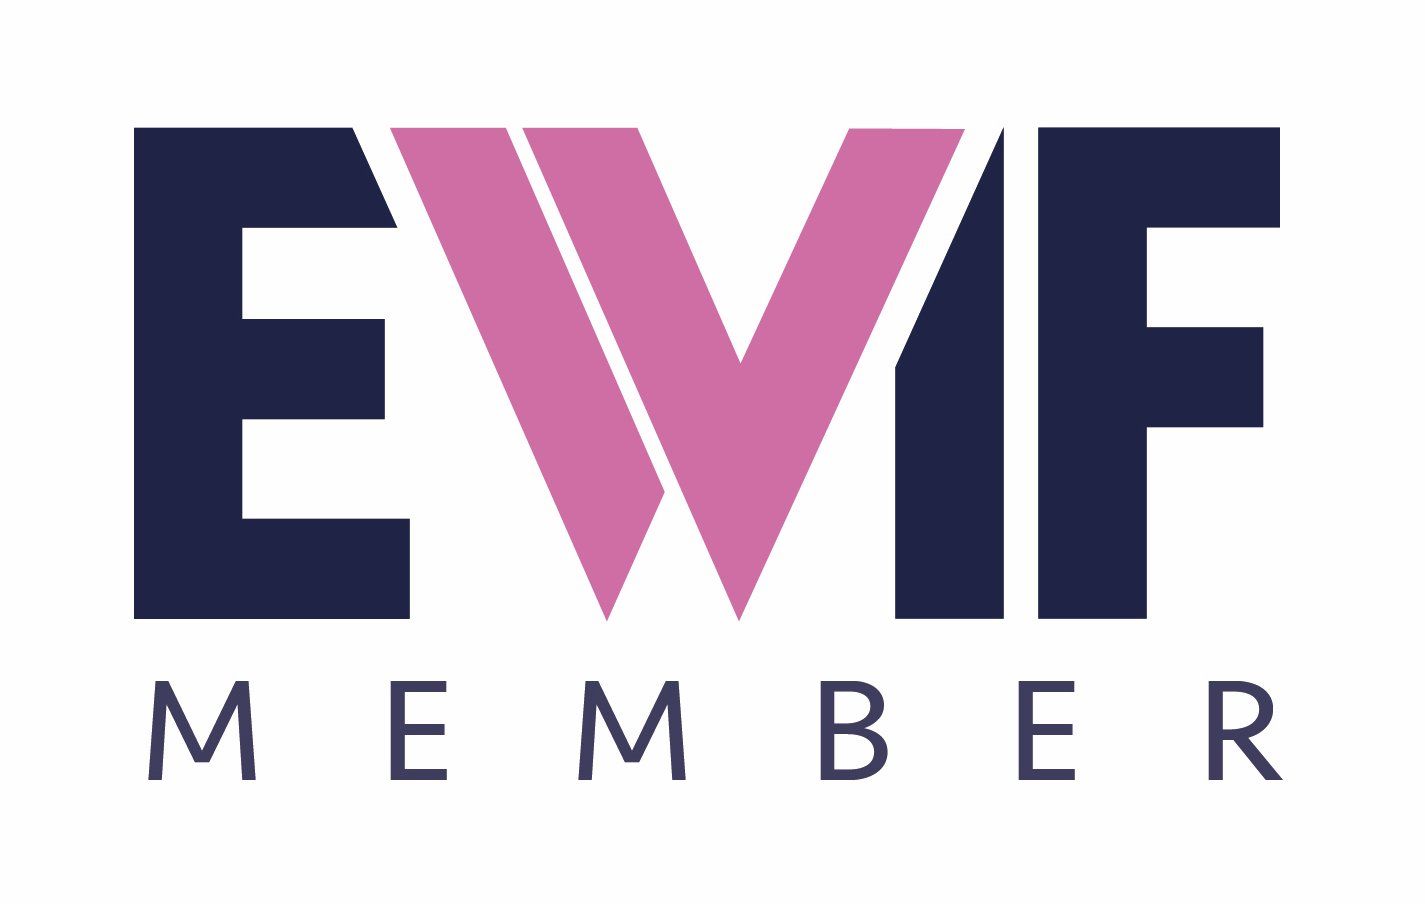 the logo for ewif member is blue and pink .